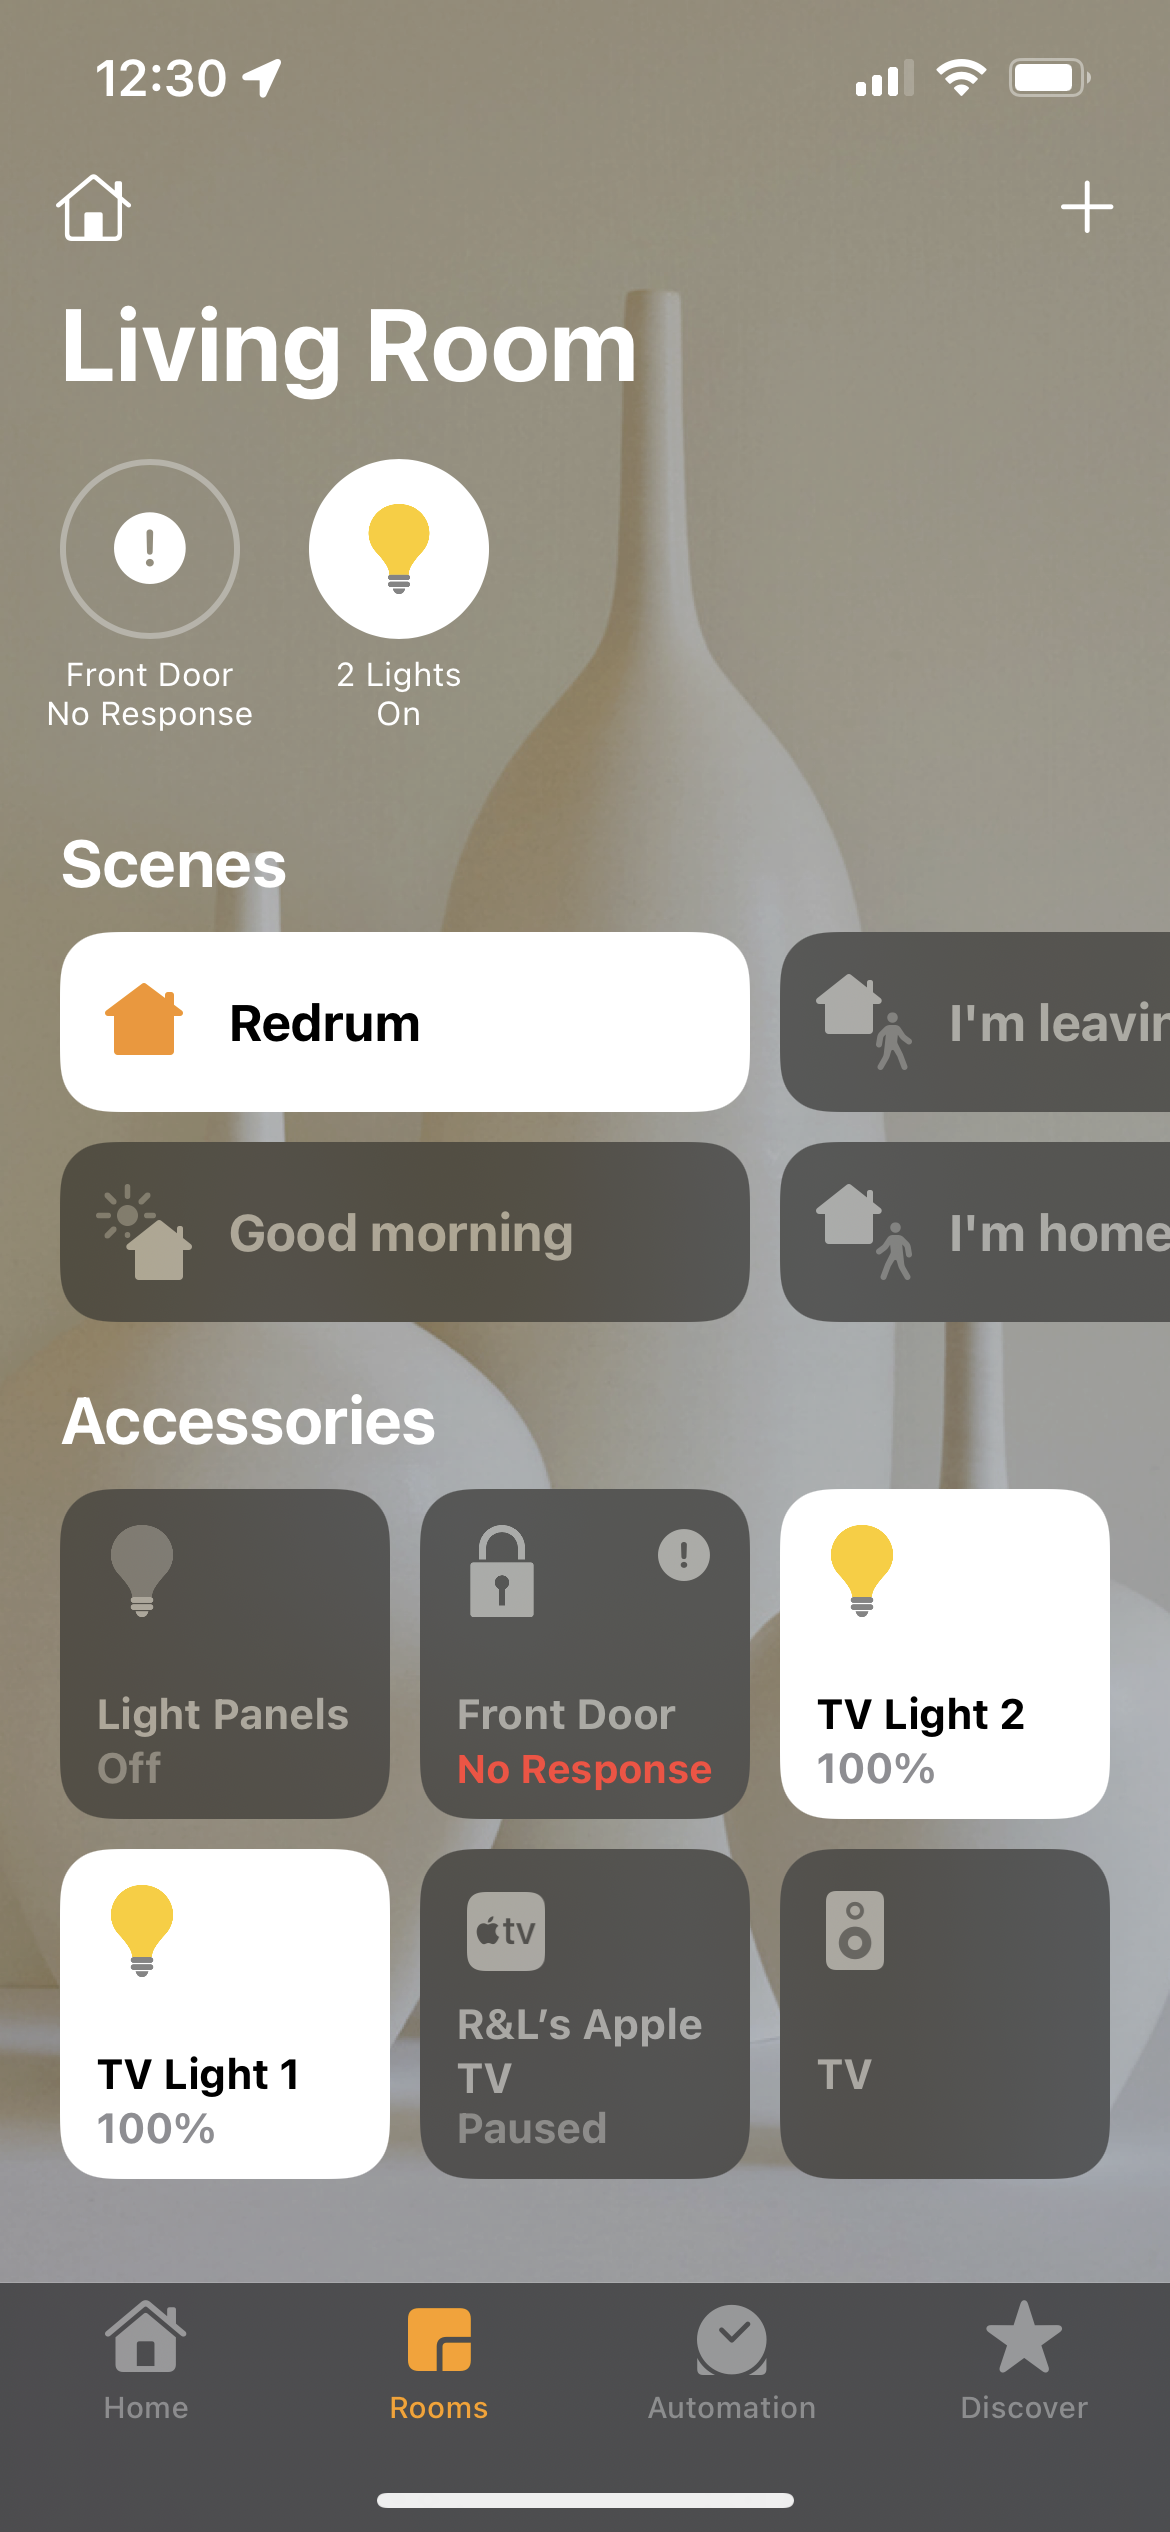 A living room layout in the Apple Home app